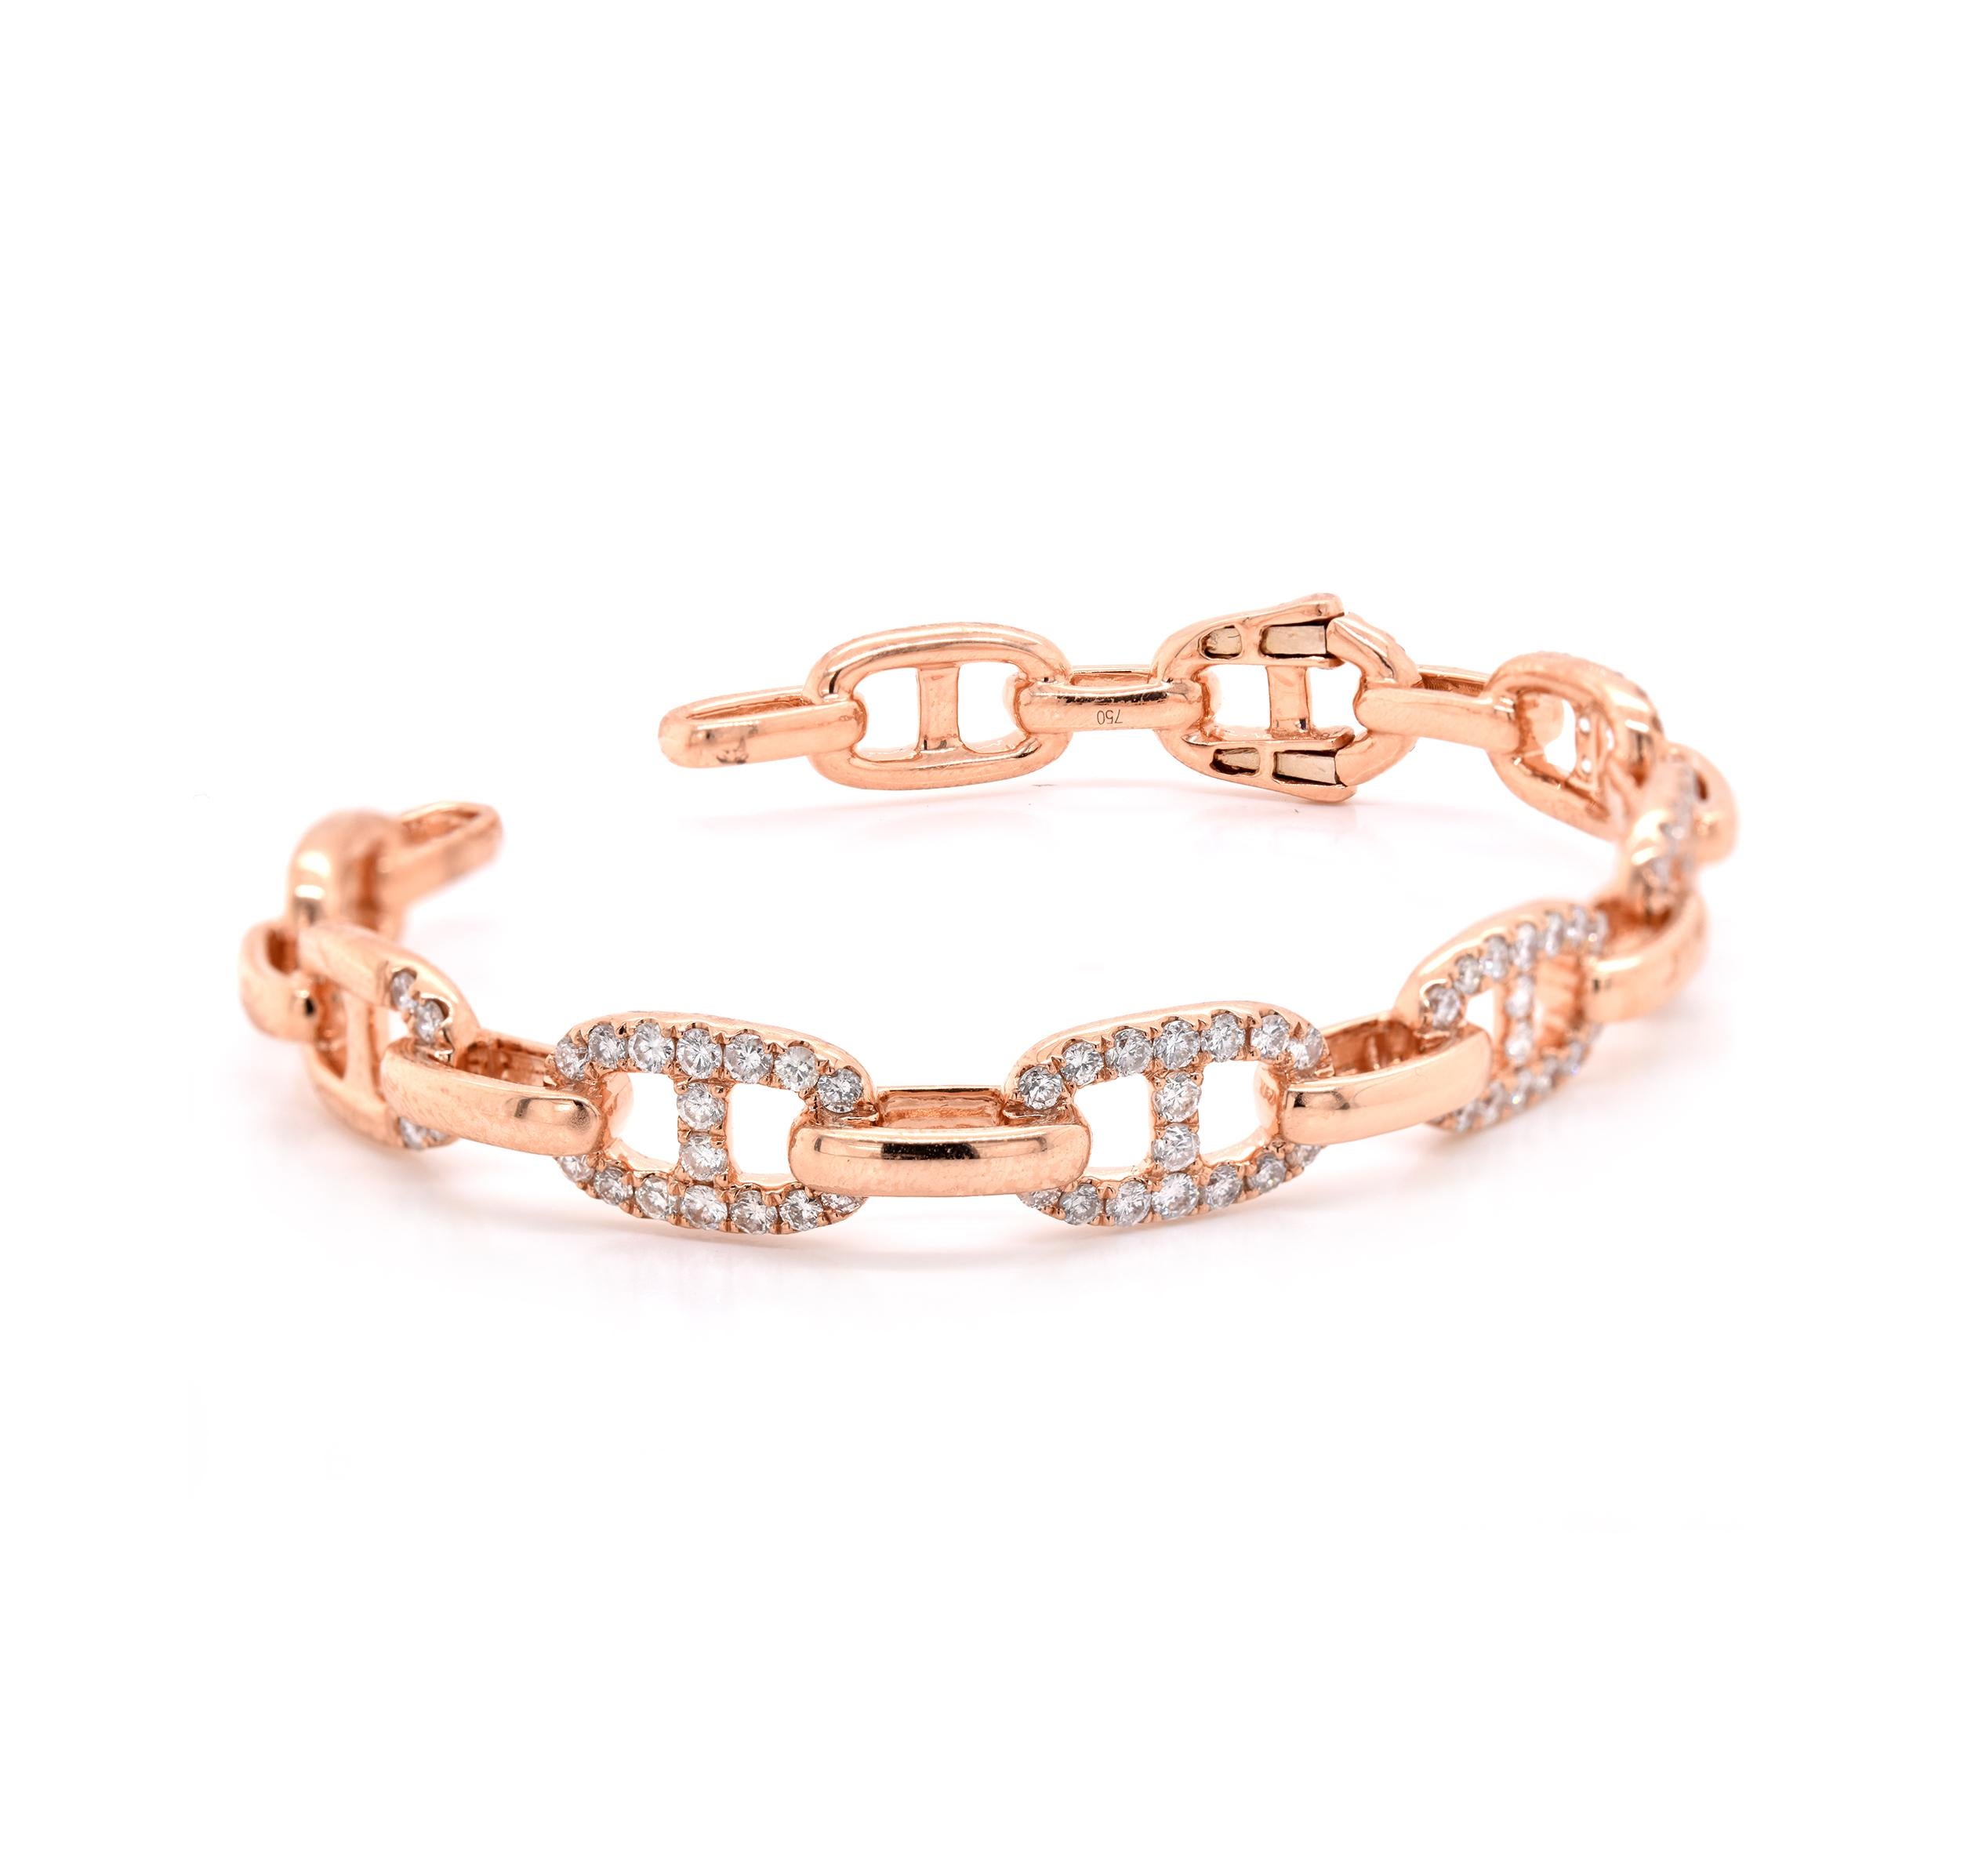 18 Karat Rose Gold Diamond Gucci Link Hinged Cuff Bracelet


Material: 18K rose gold
Diamonds:  88 round cut = 1.97cttw
Color: G
Clarity: VS
Dimensions: bracelet will fit up to a 6.5-inch wrist 
Weight: 24.05 grams
